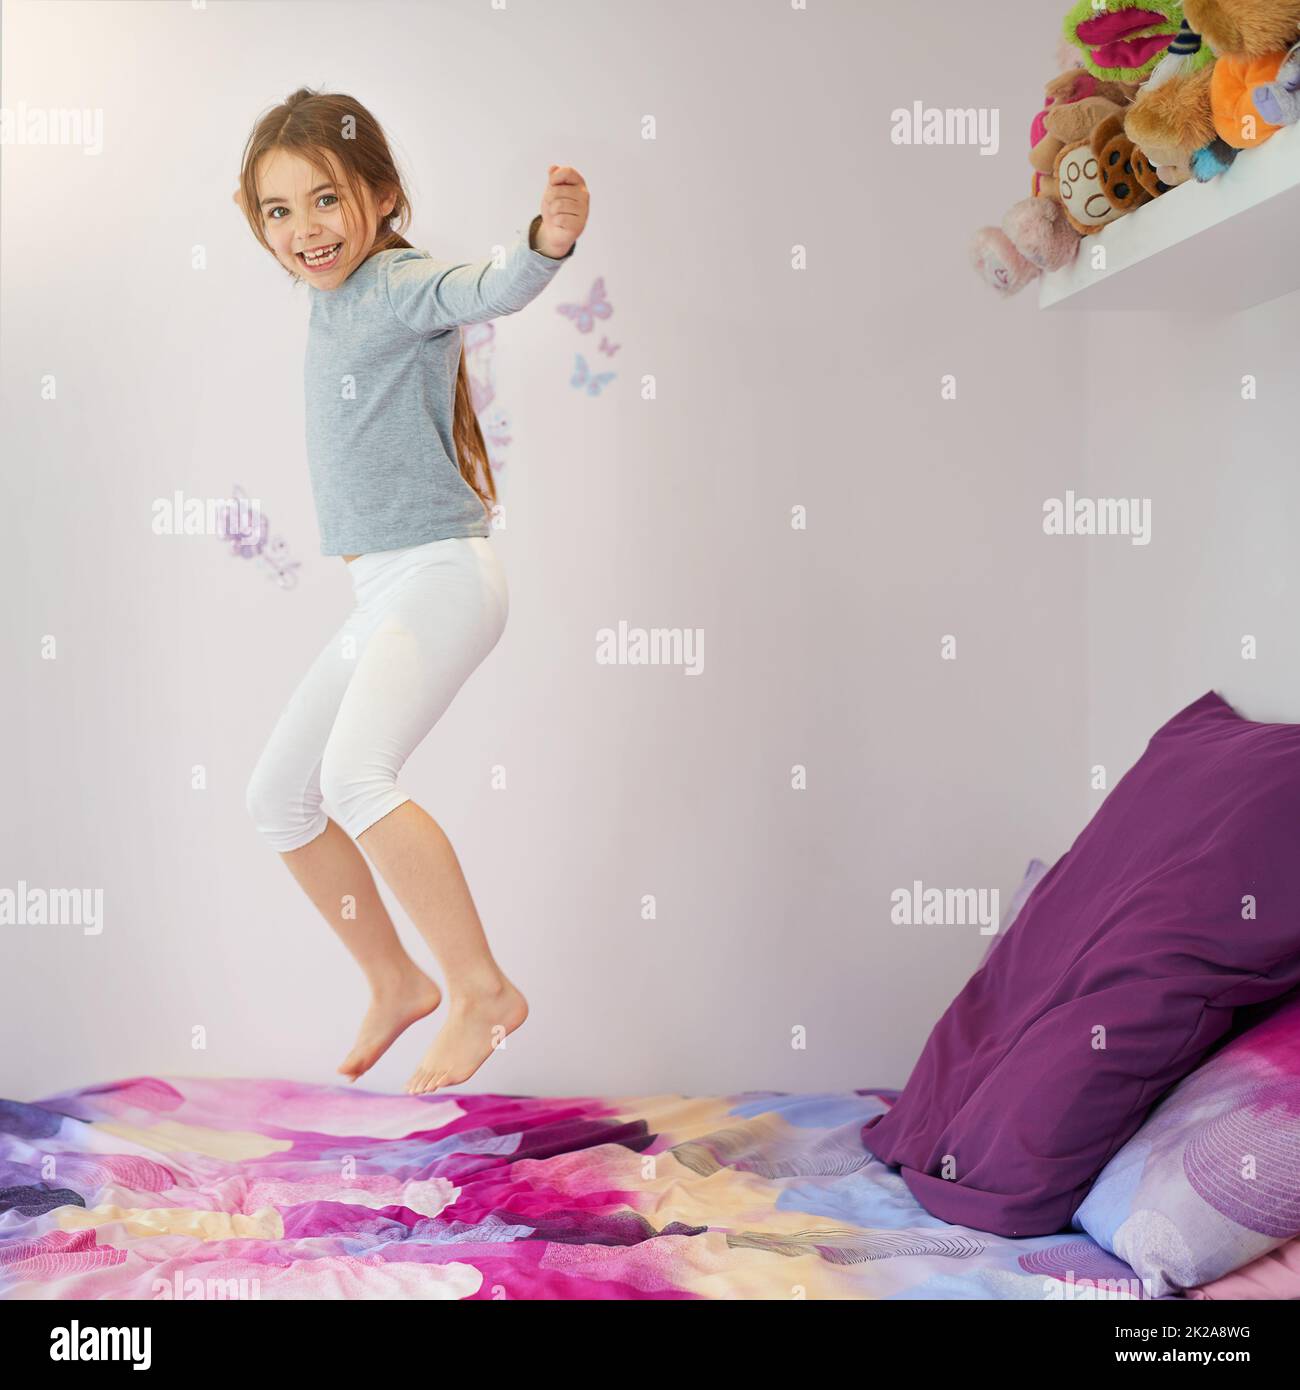 Bouncing for joy. Portrait of a cute little girl jumping on her bed at home. Stock Photo